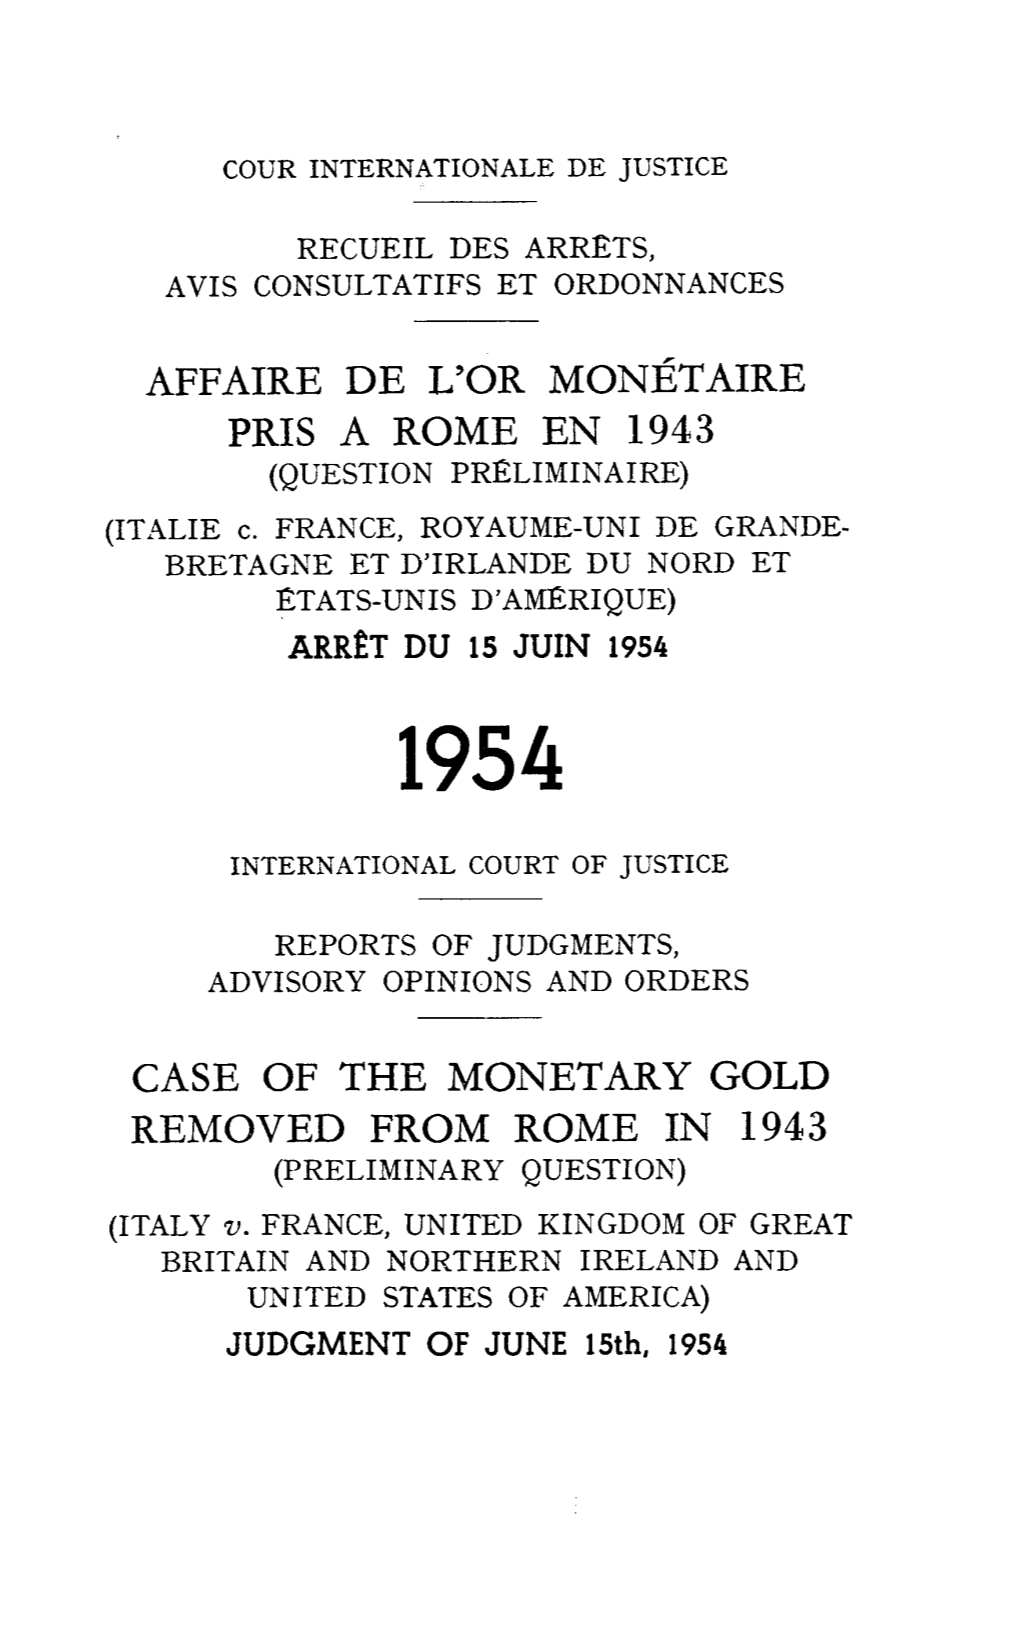 MONETARY GOLD REMBVED from ROME in 1943 (PRELIMINARY QUESTION) (ITALY V